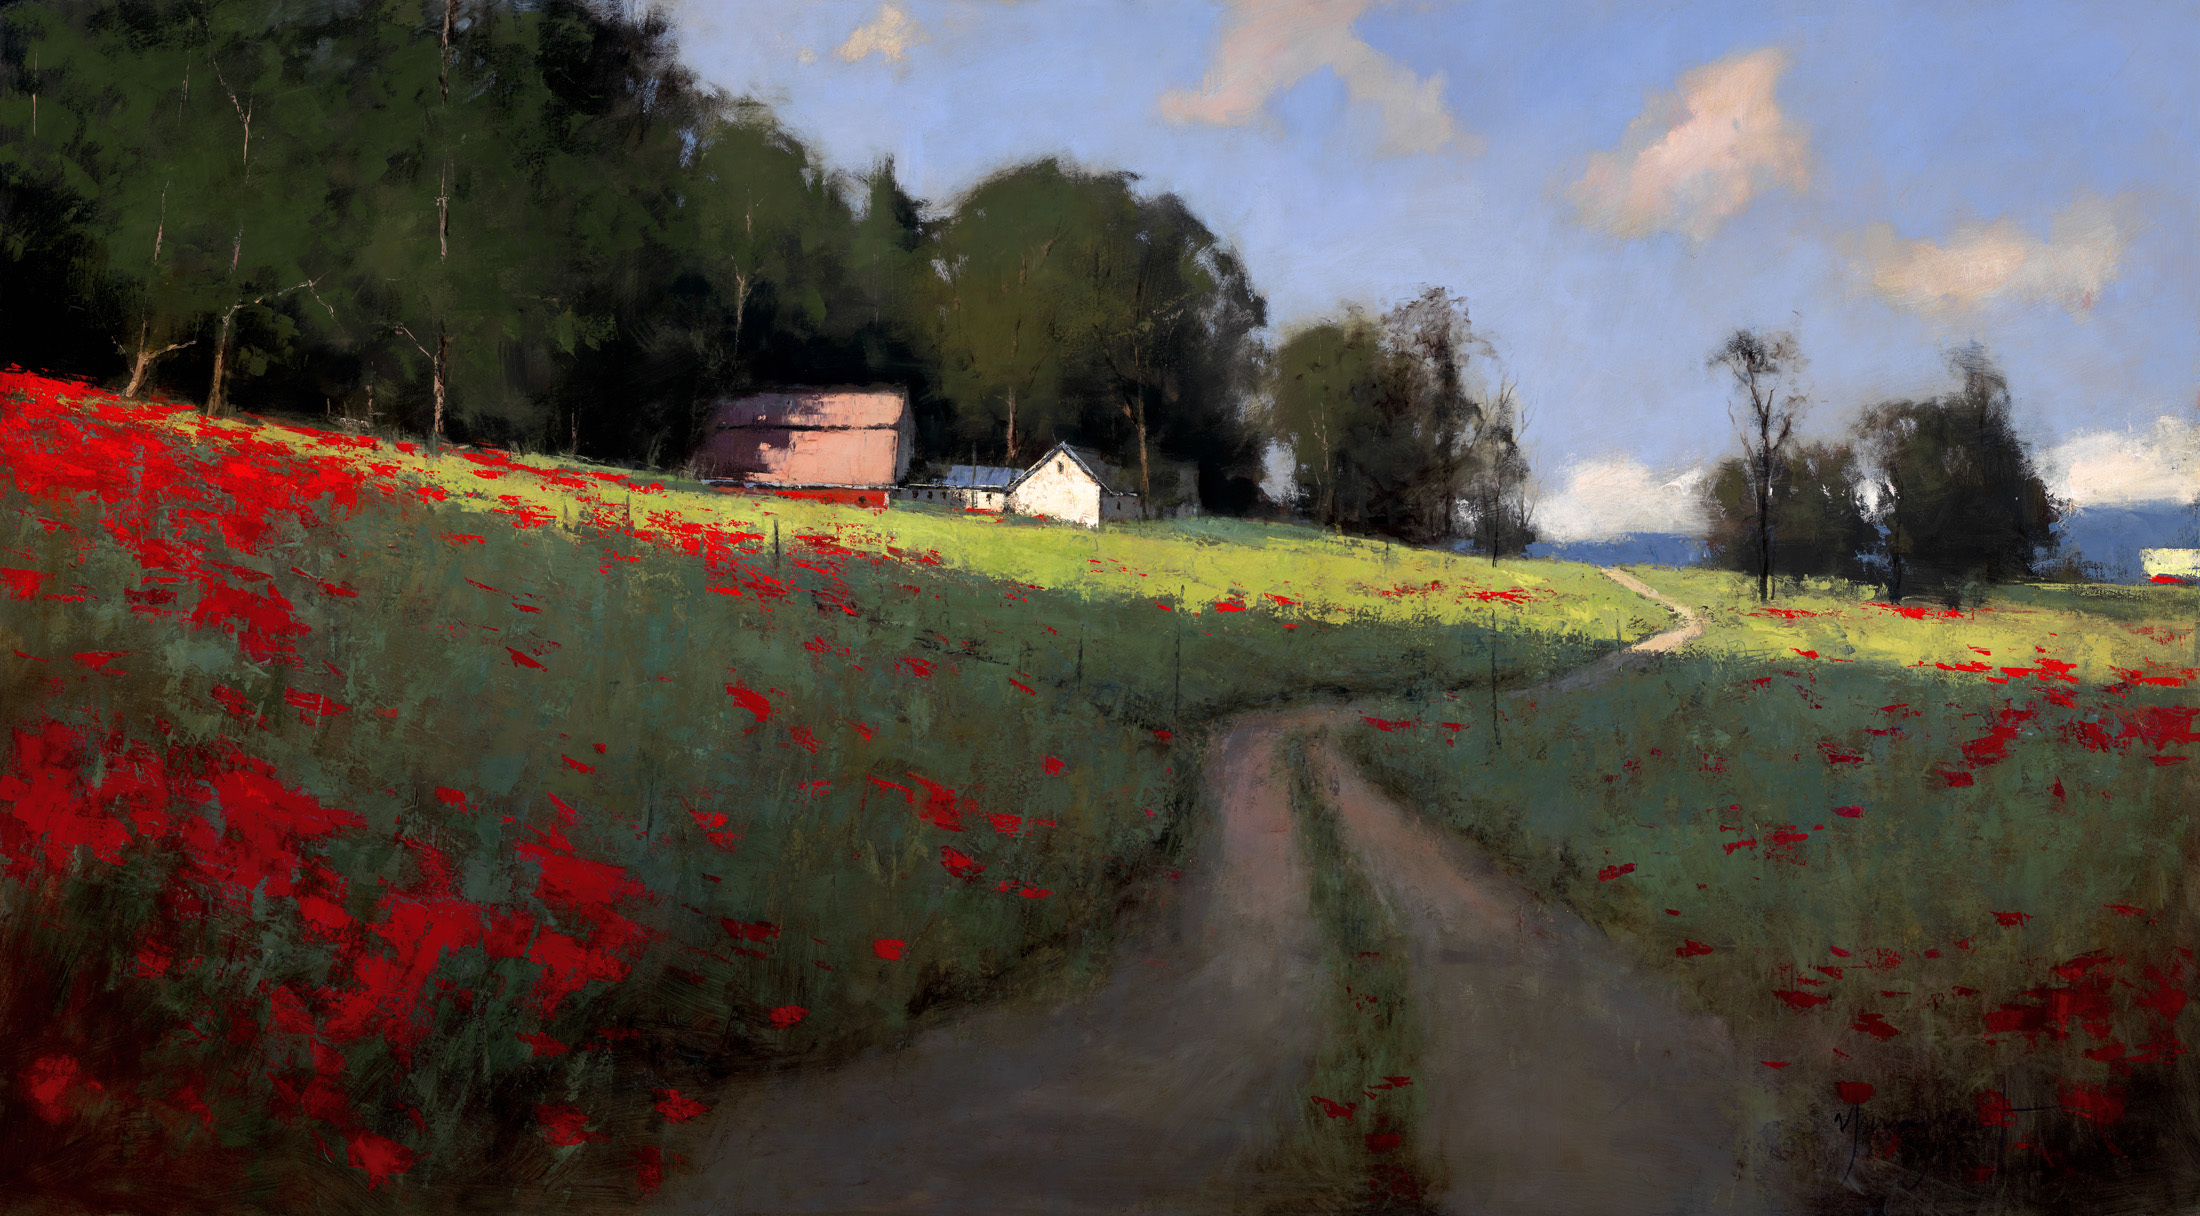 landscape, Art, Painting, Romona, Youngquist, Field, Poppies, Summer, Road, Track, Trail, Trees, Sky, Clouds, Houses, Village Wallpaper